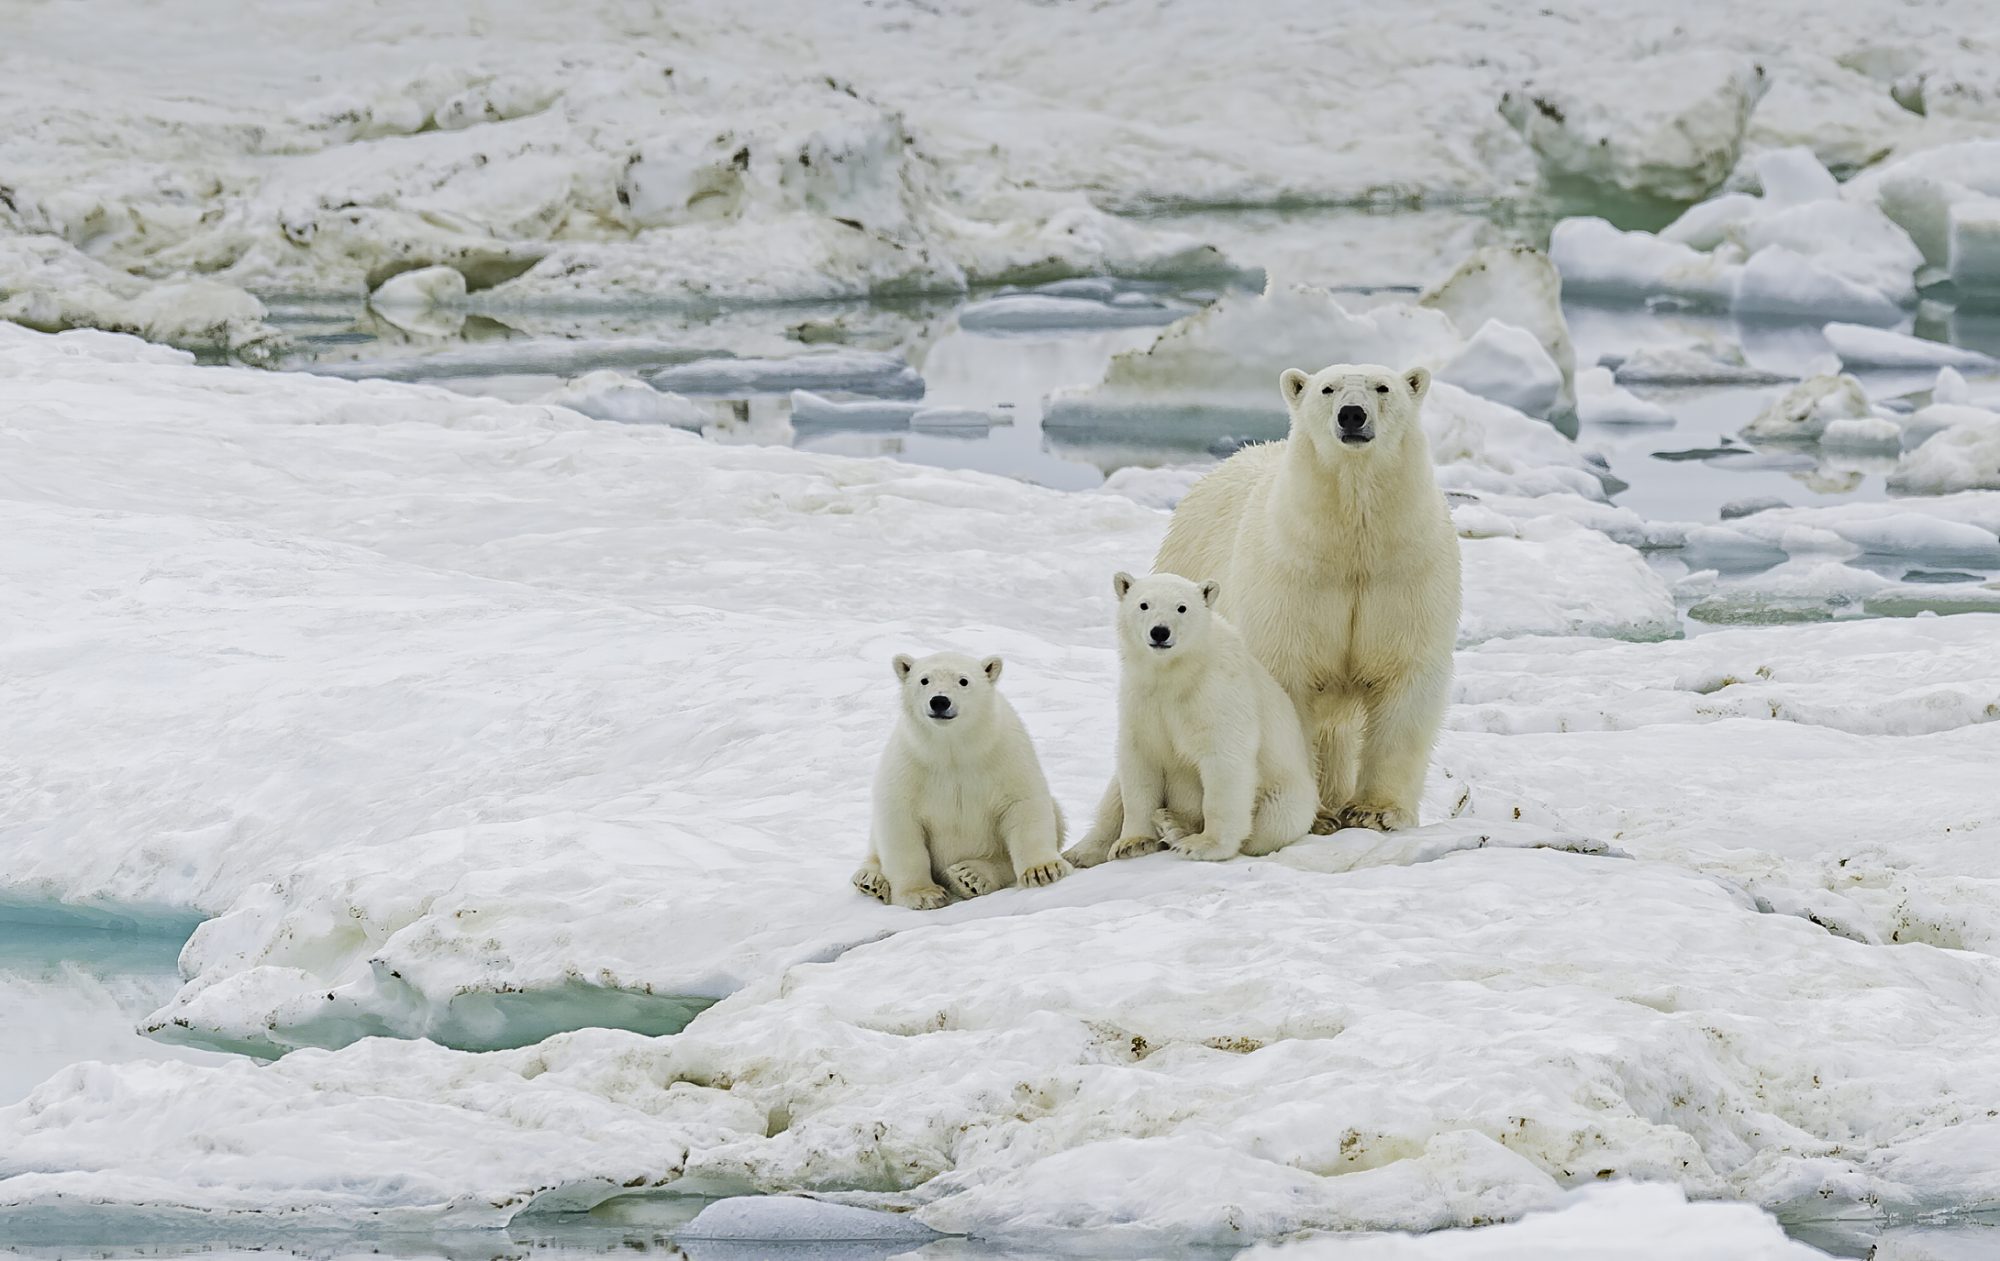 Polar bears are facing climate-driven starvation